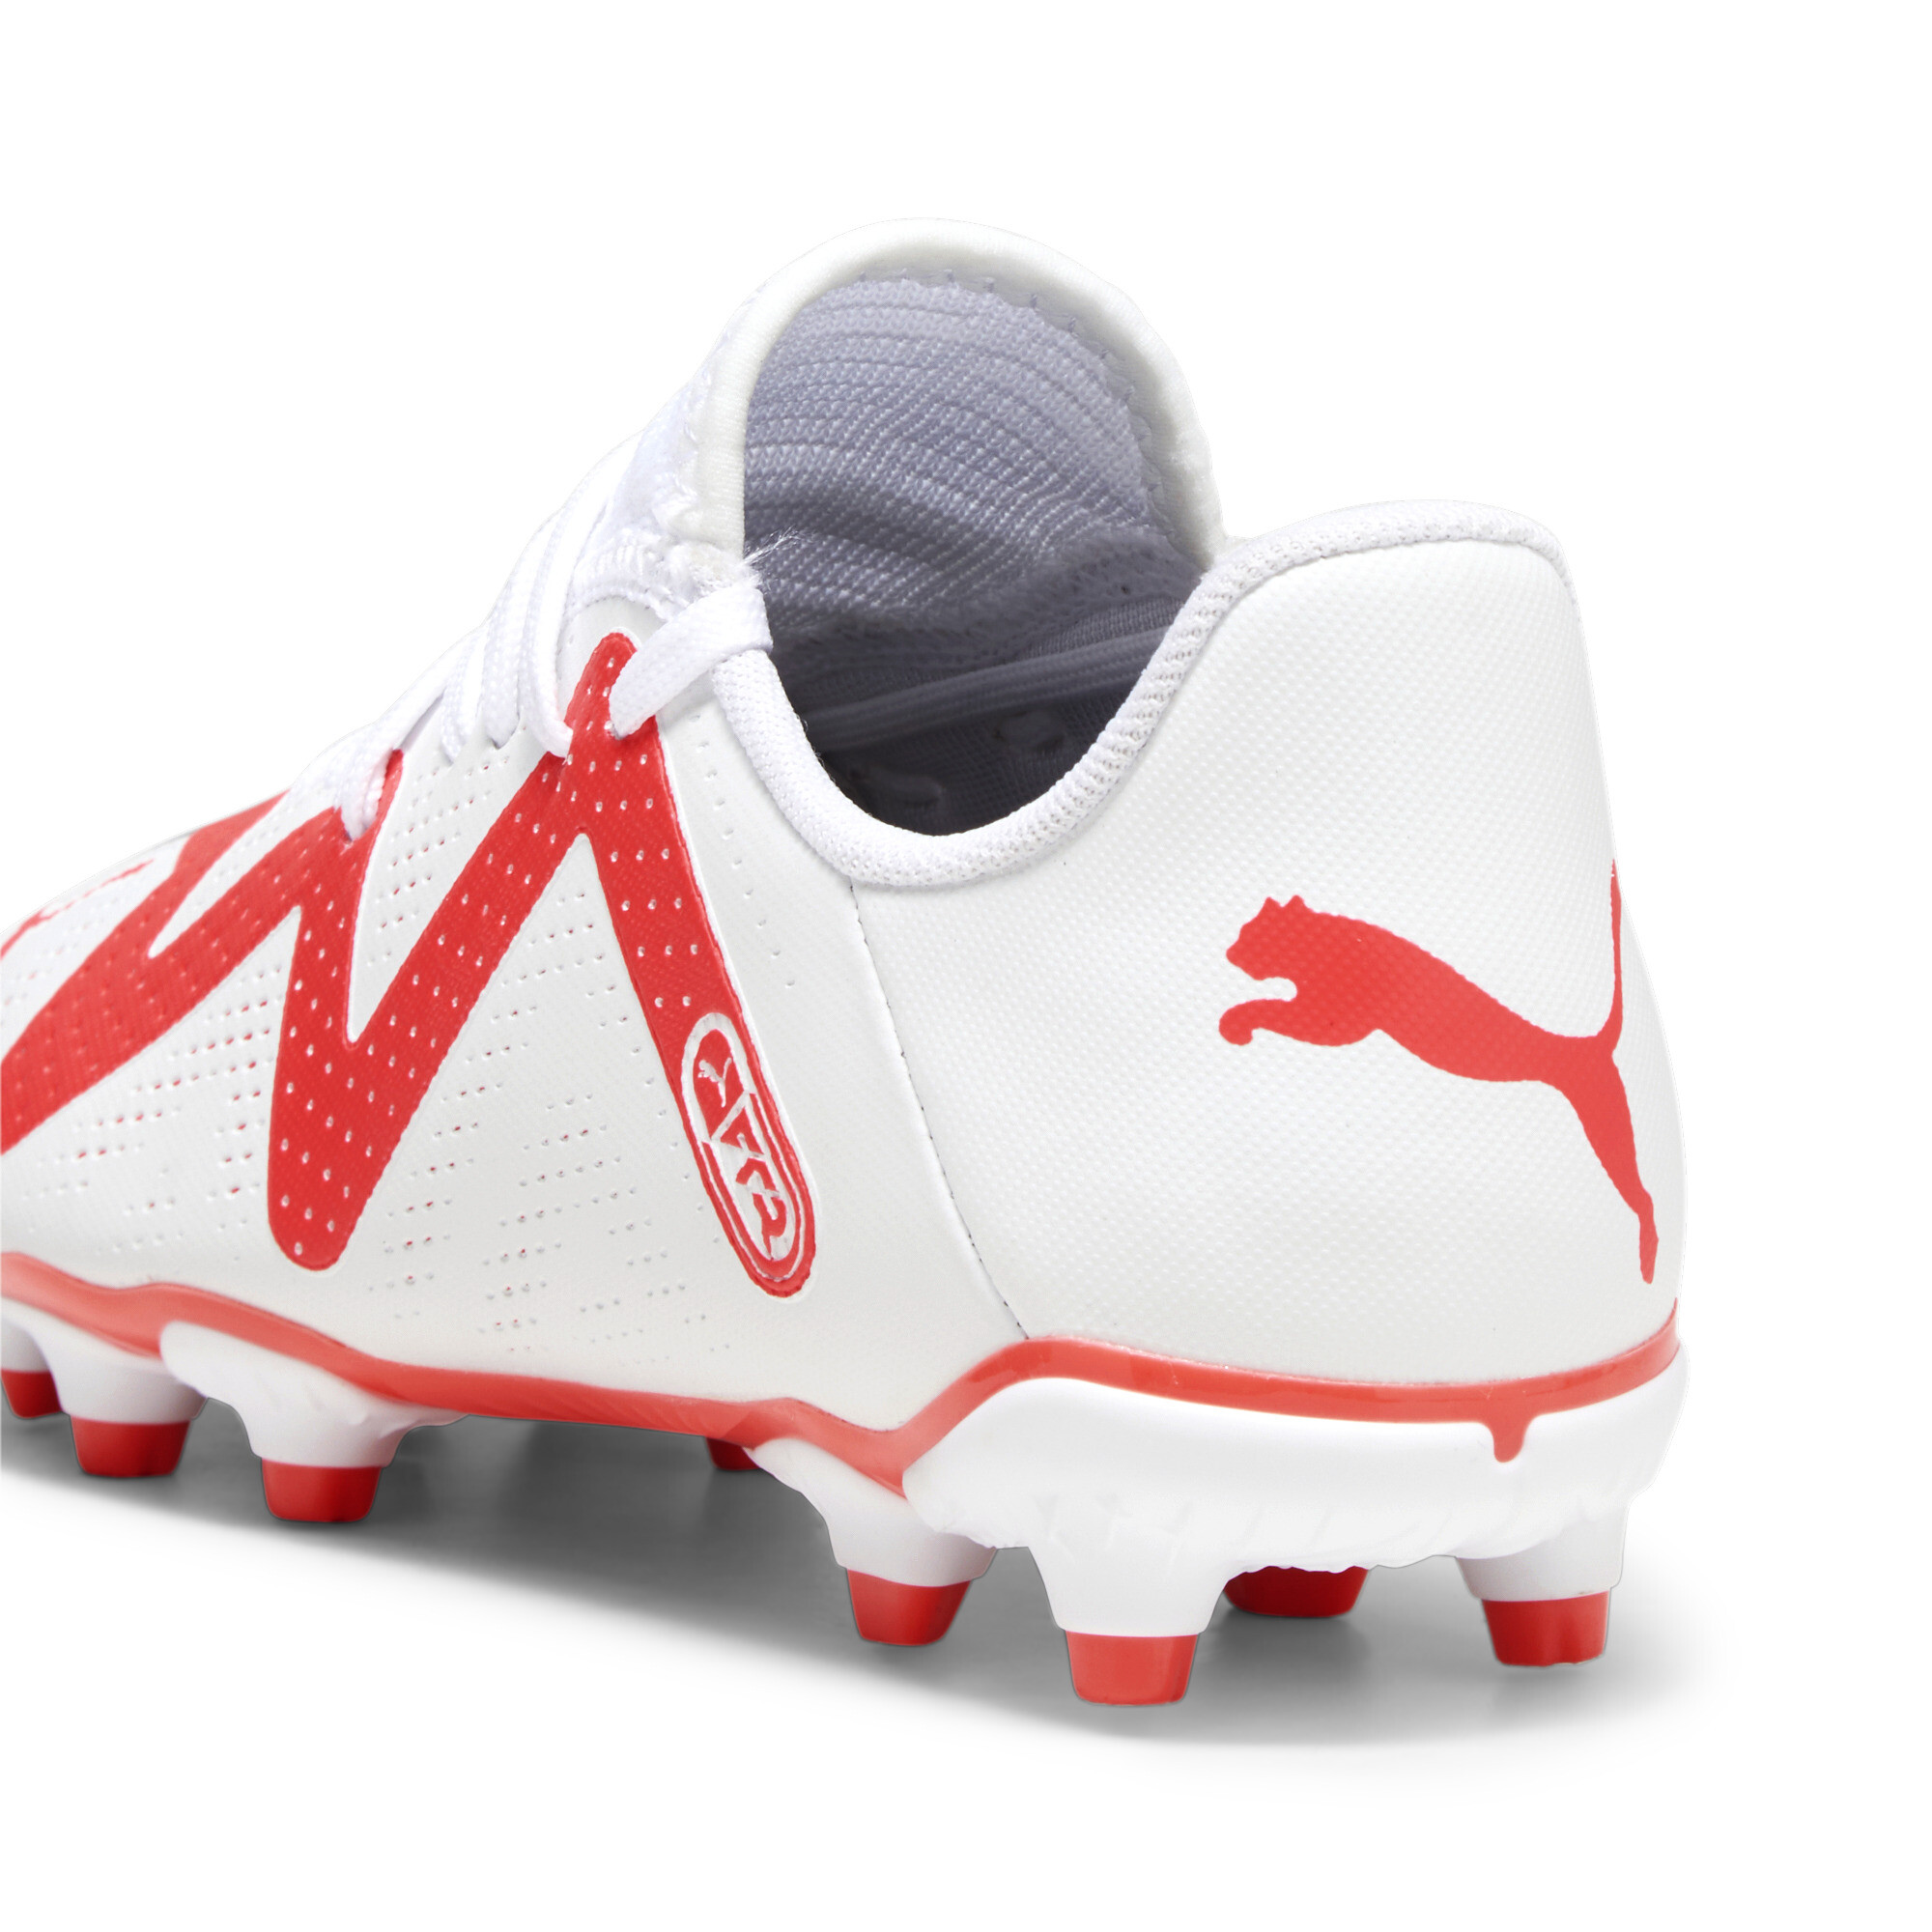 Puma FUTURE PLAY FG/AG Youth Football Boots, White, Size 32.5, Shoes